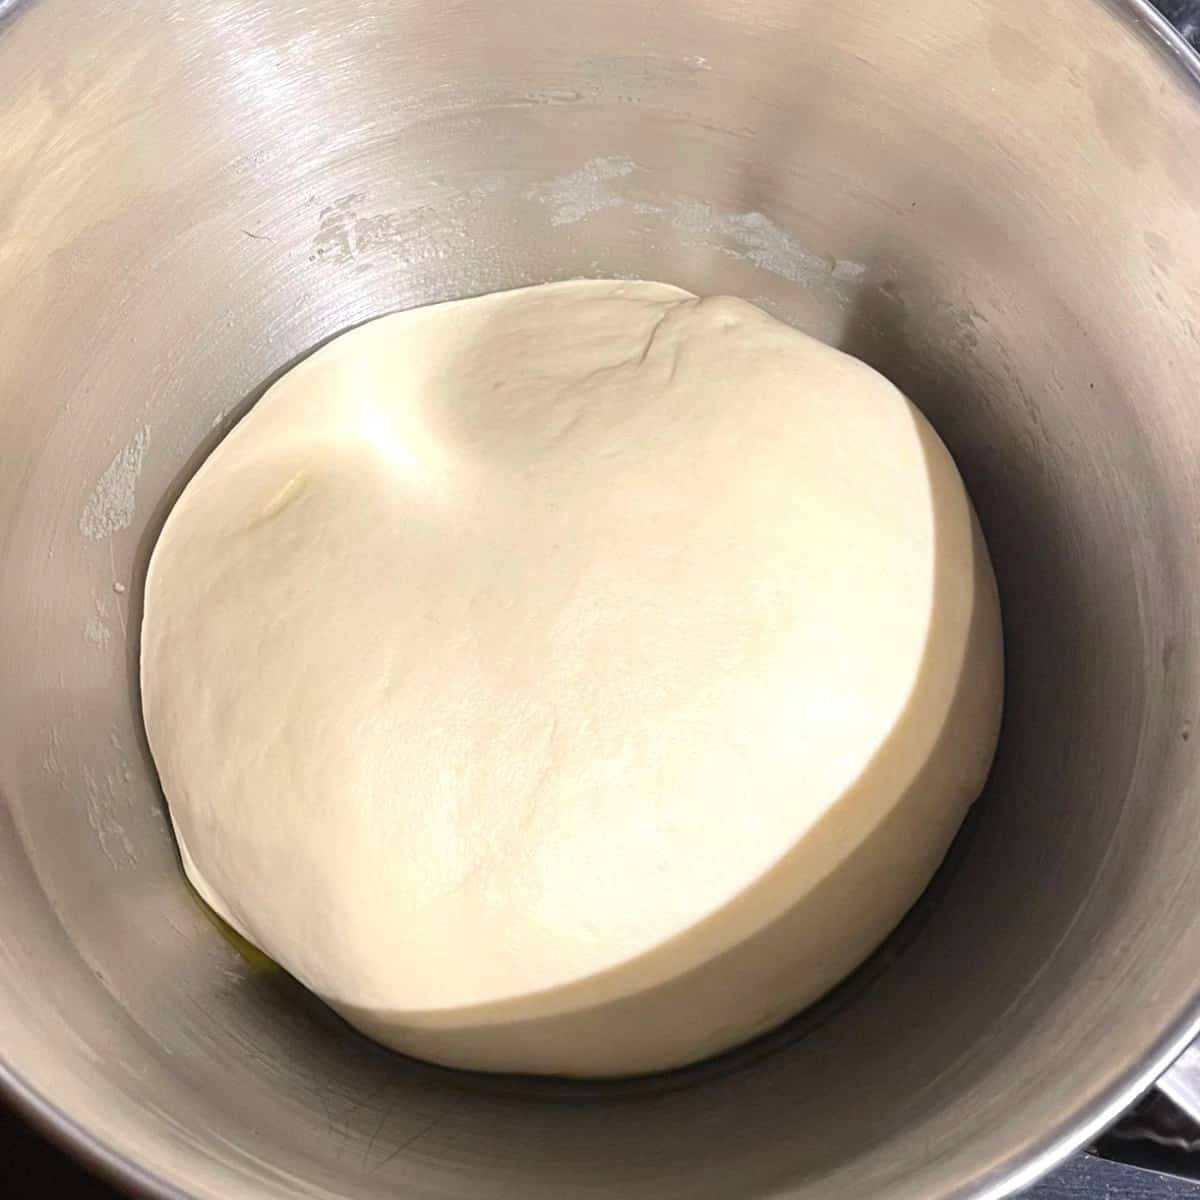 Kneaded dough after rising in steel bowl.